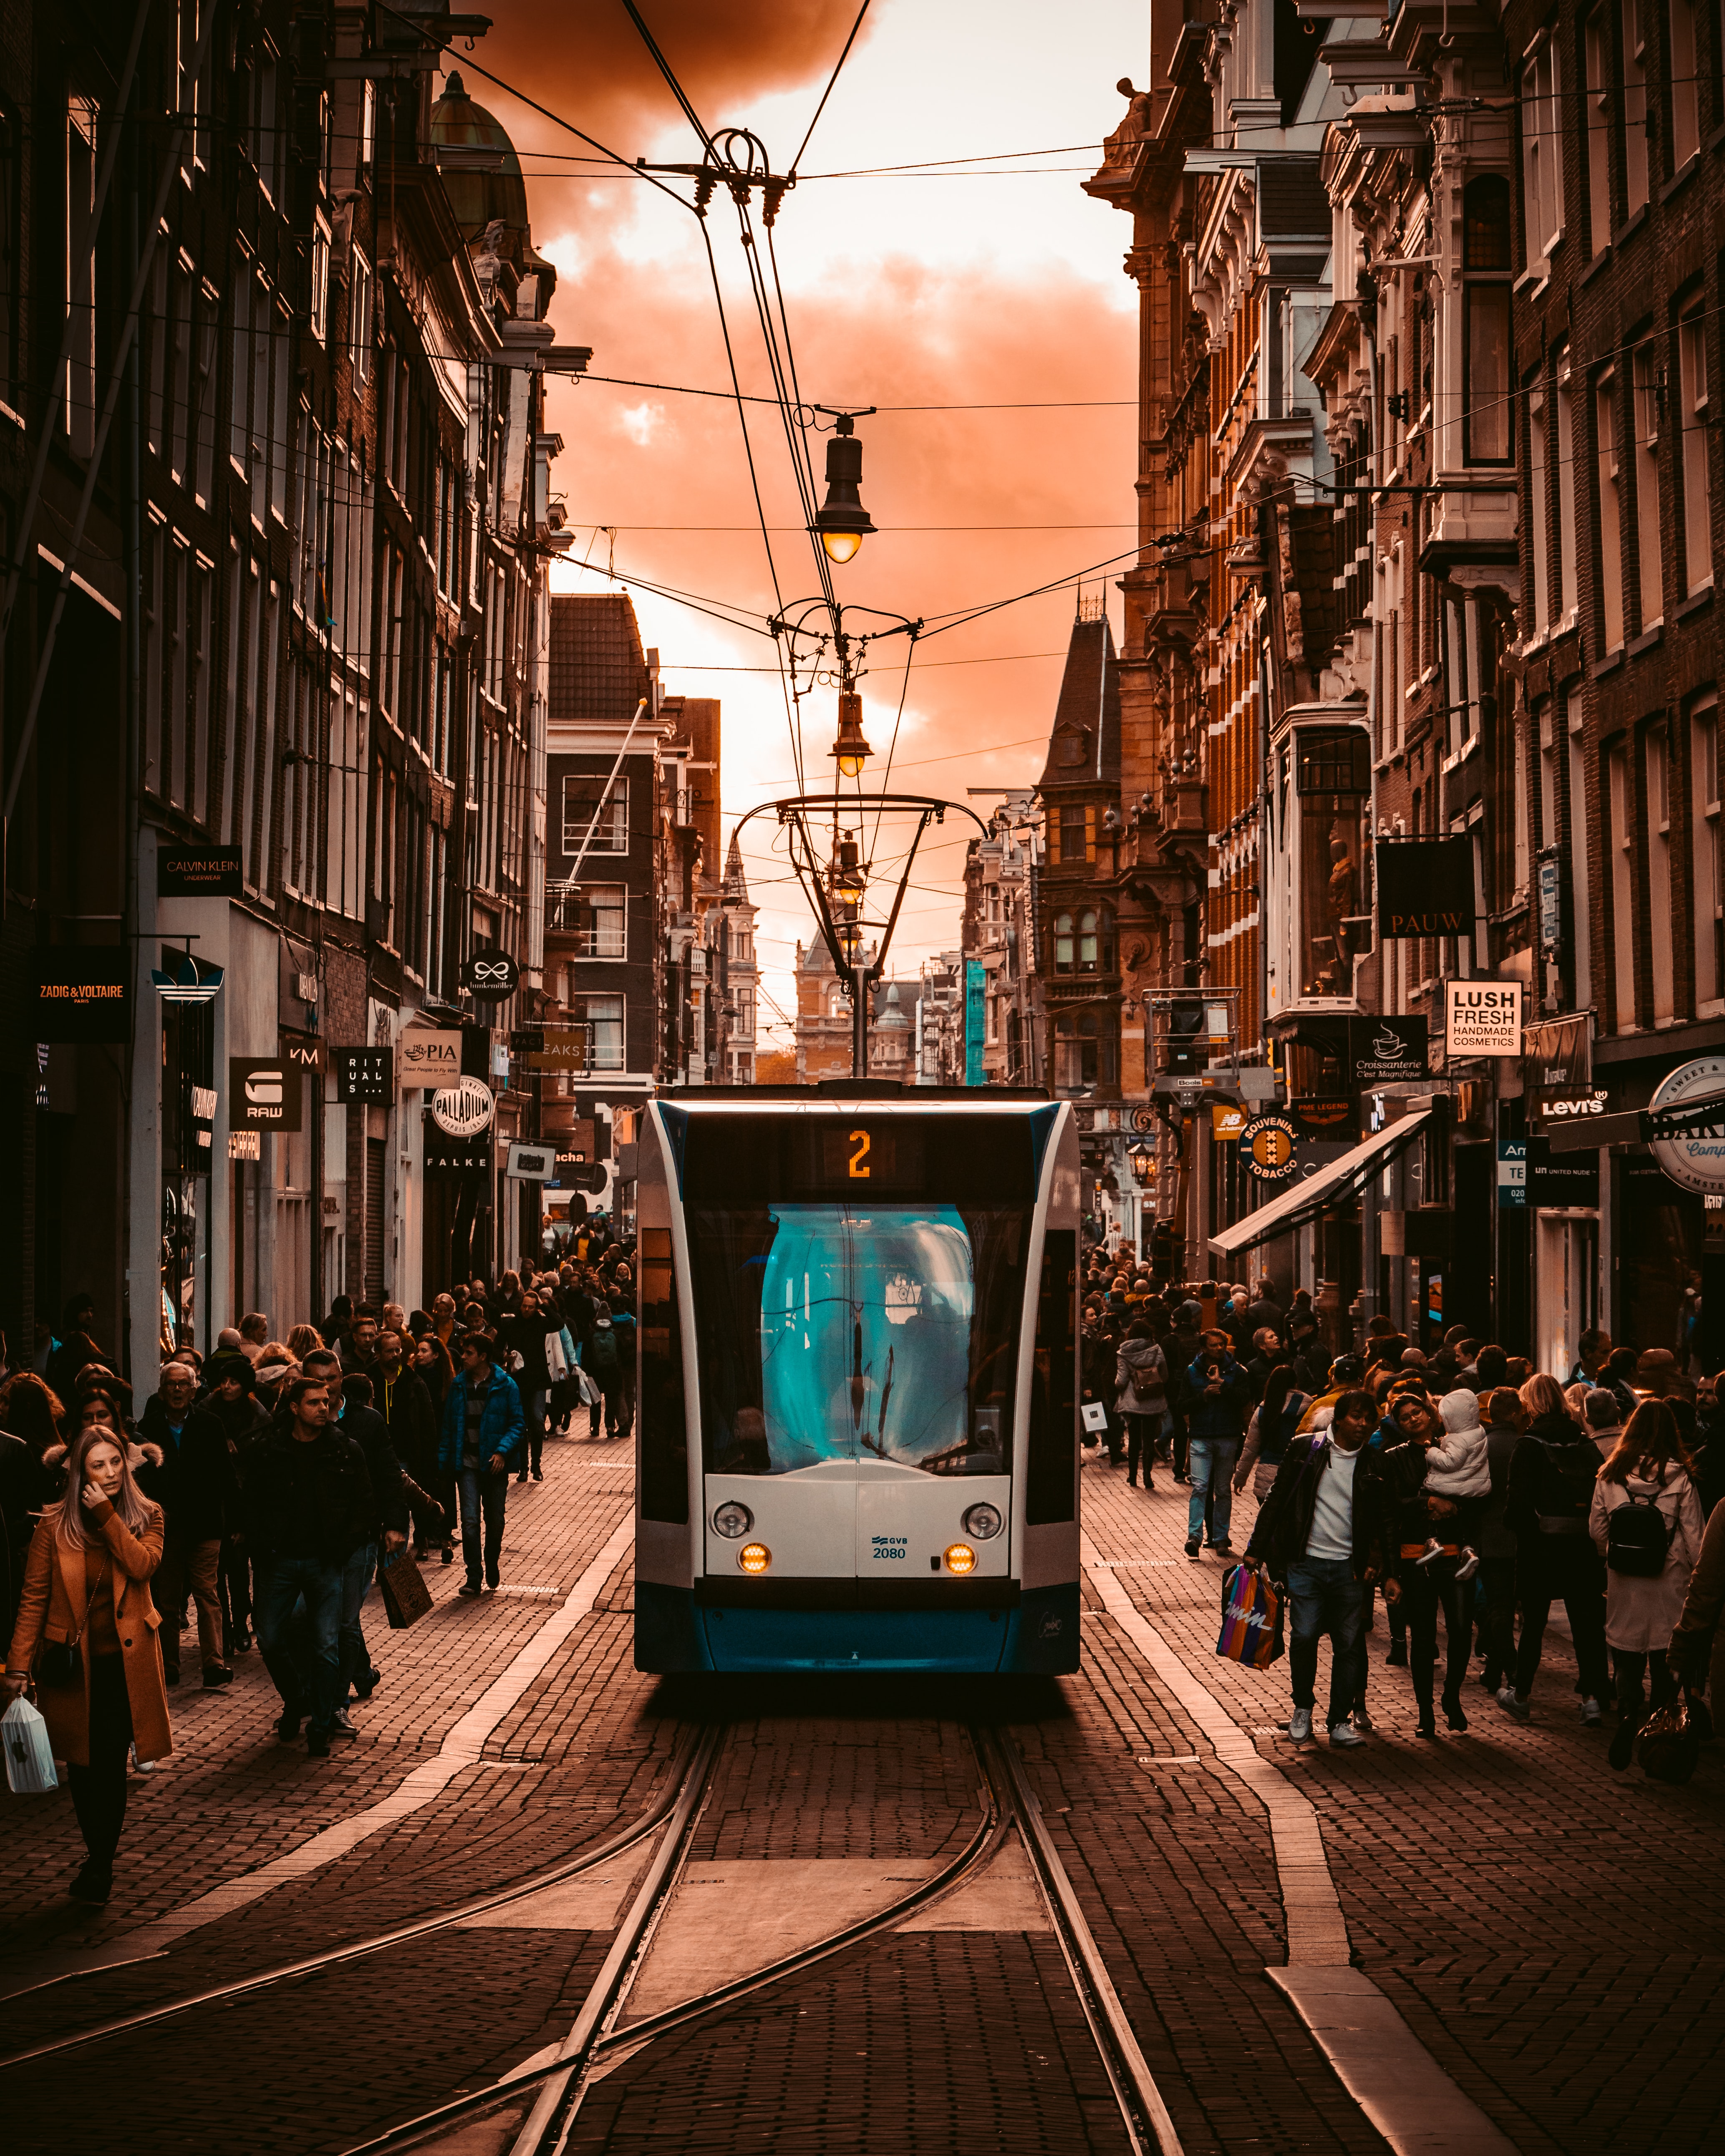 Travel Netherlands through its well-connection public transport system